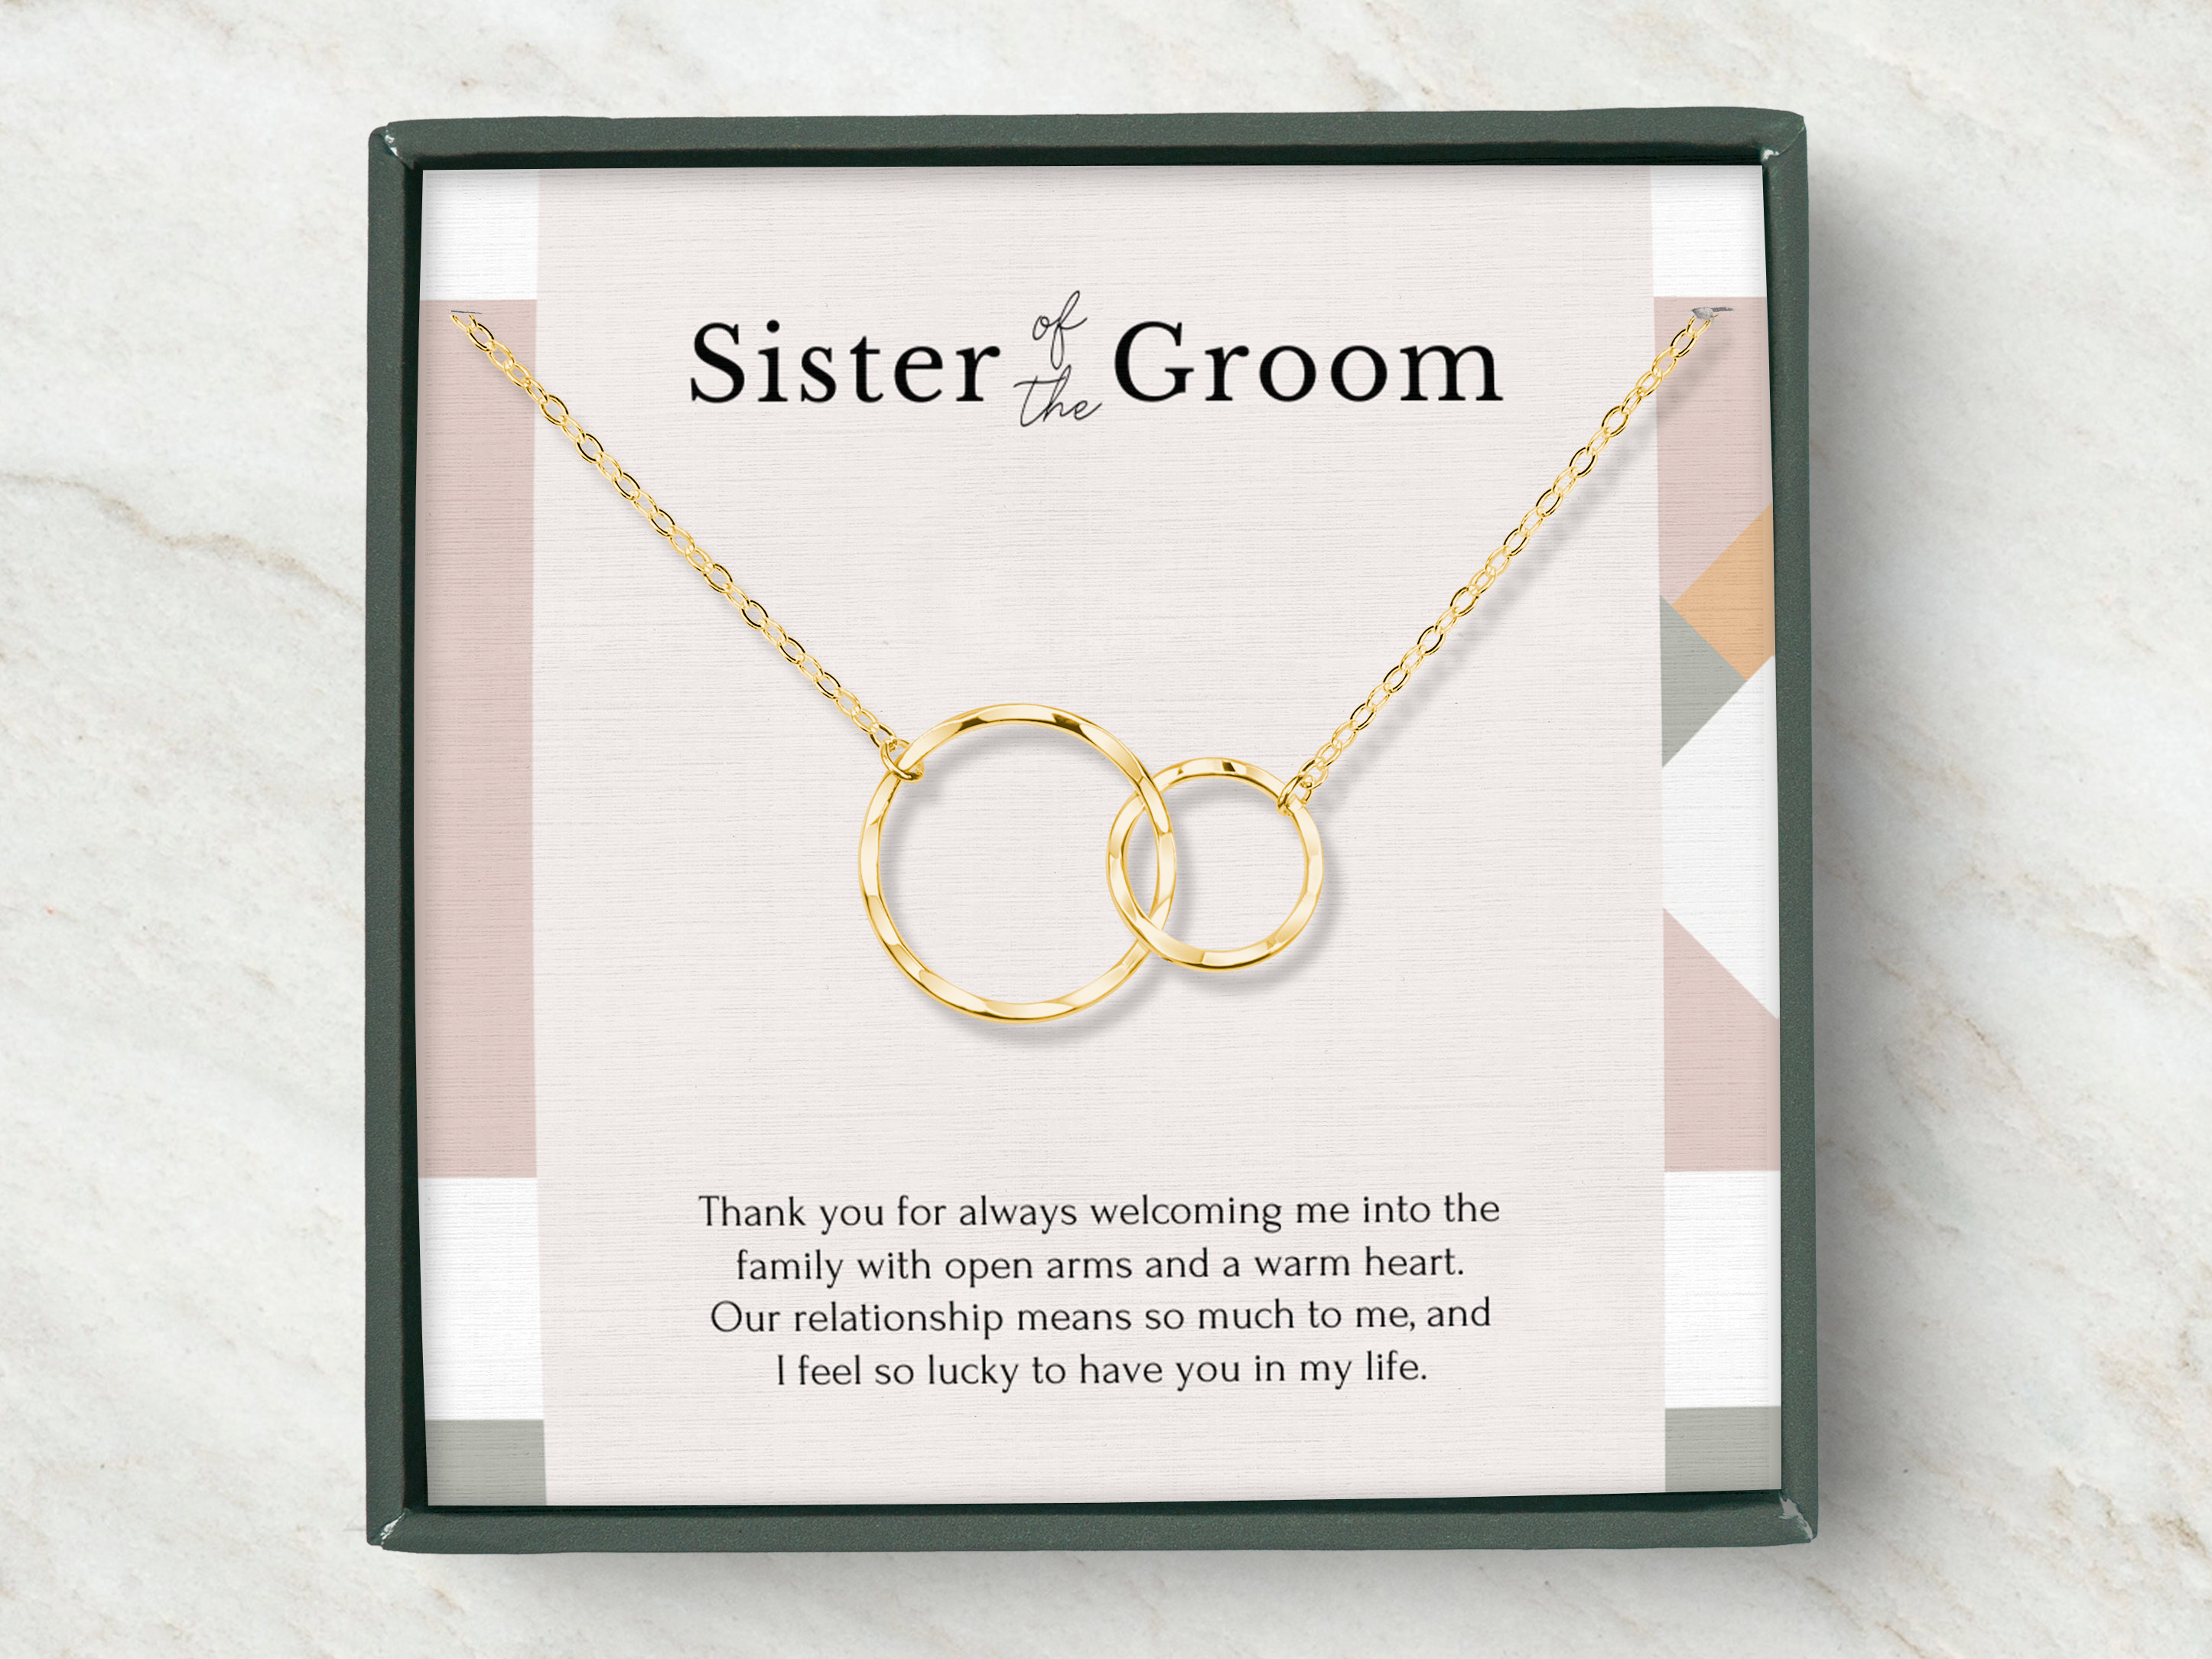 24 Unique and Meaningful Gifts for the Mother of the Bride